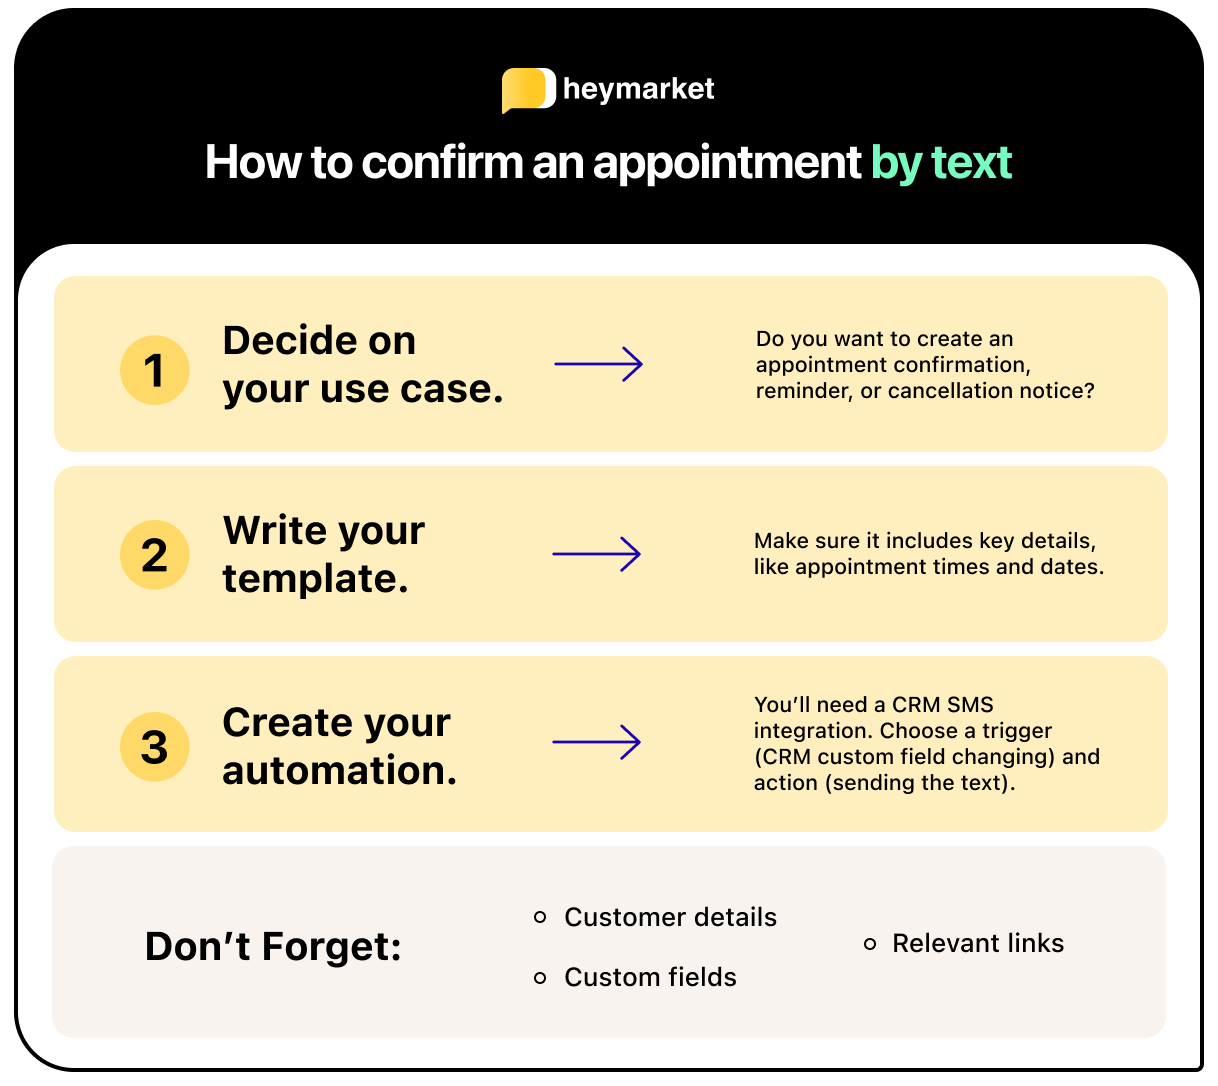 Checklist for sending appointment confirmation texts